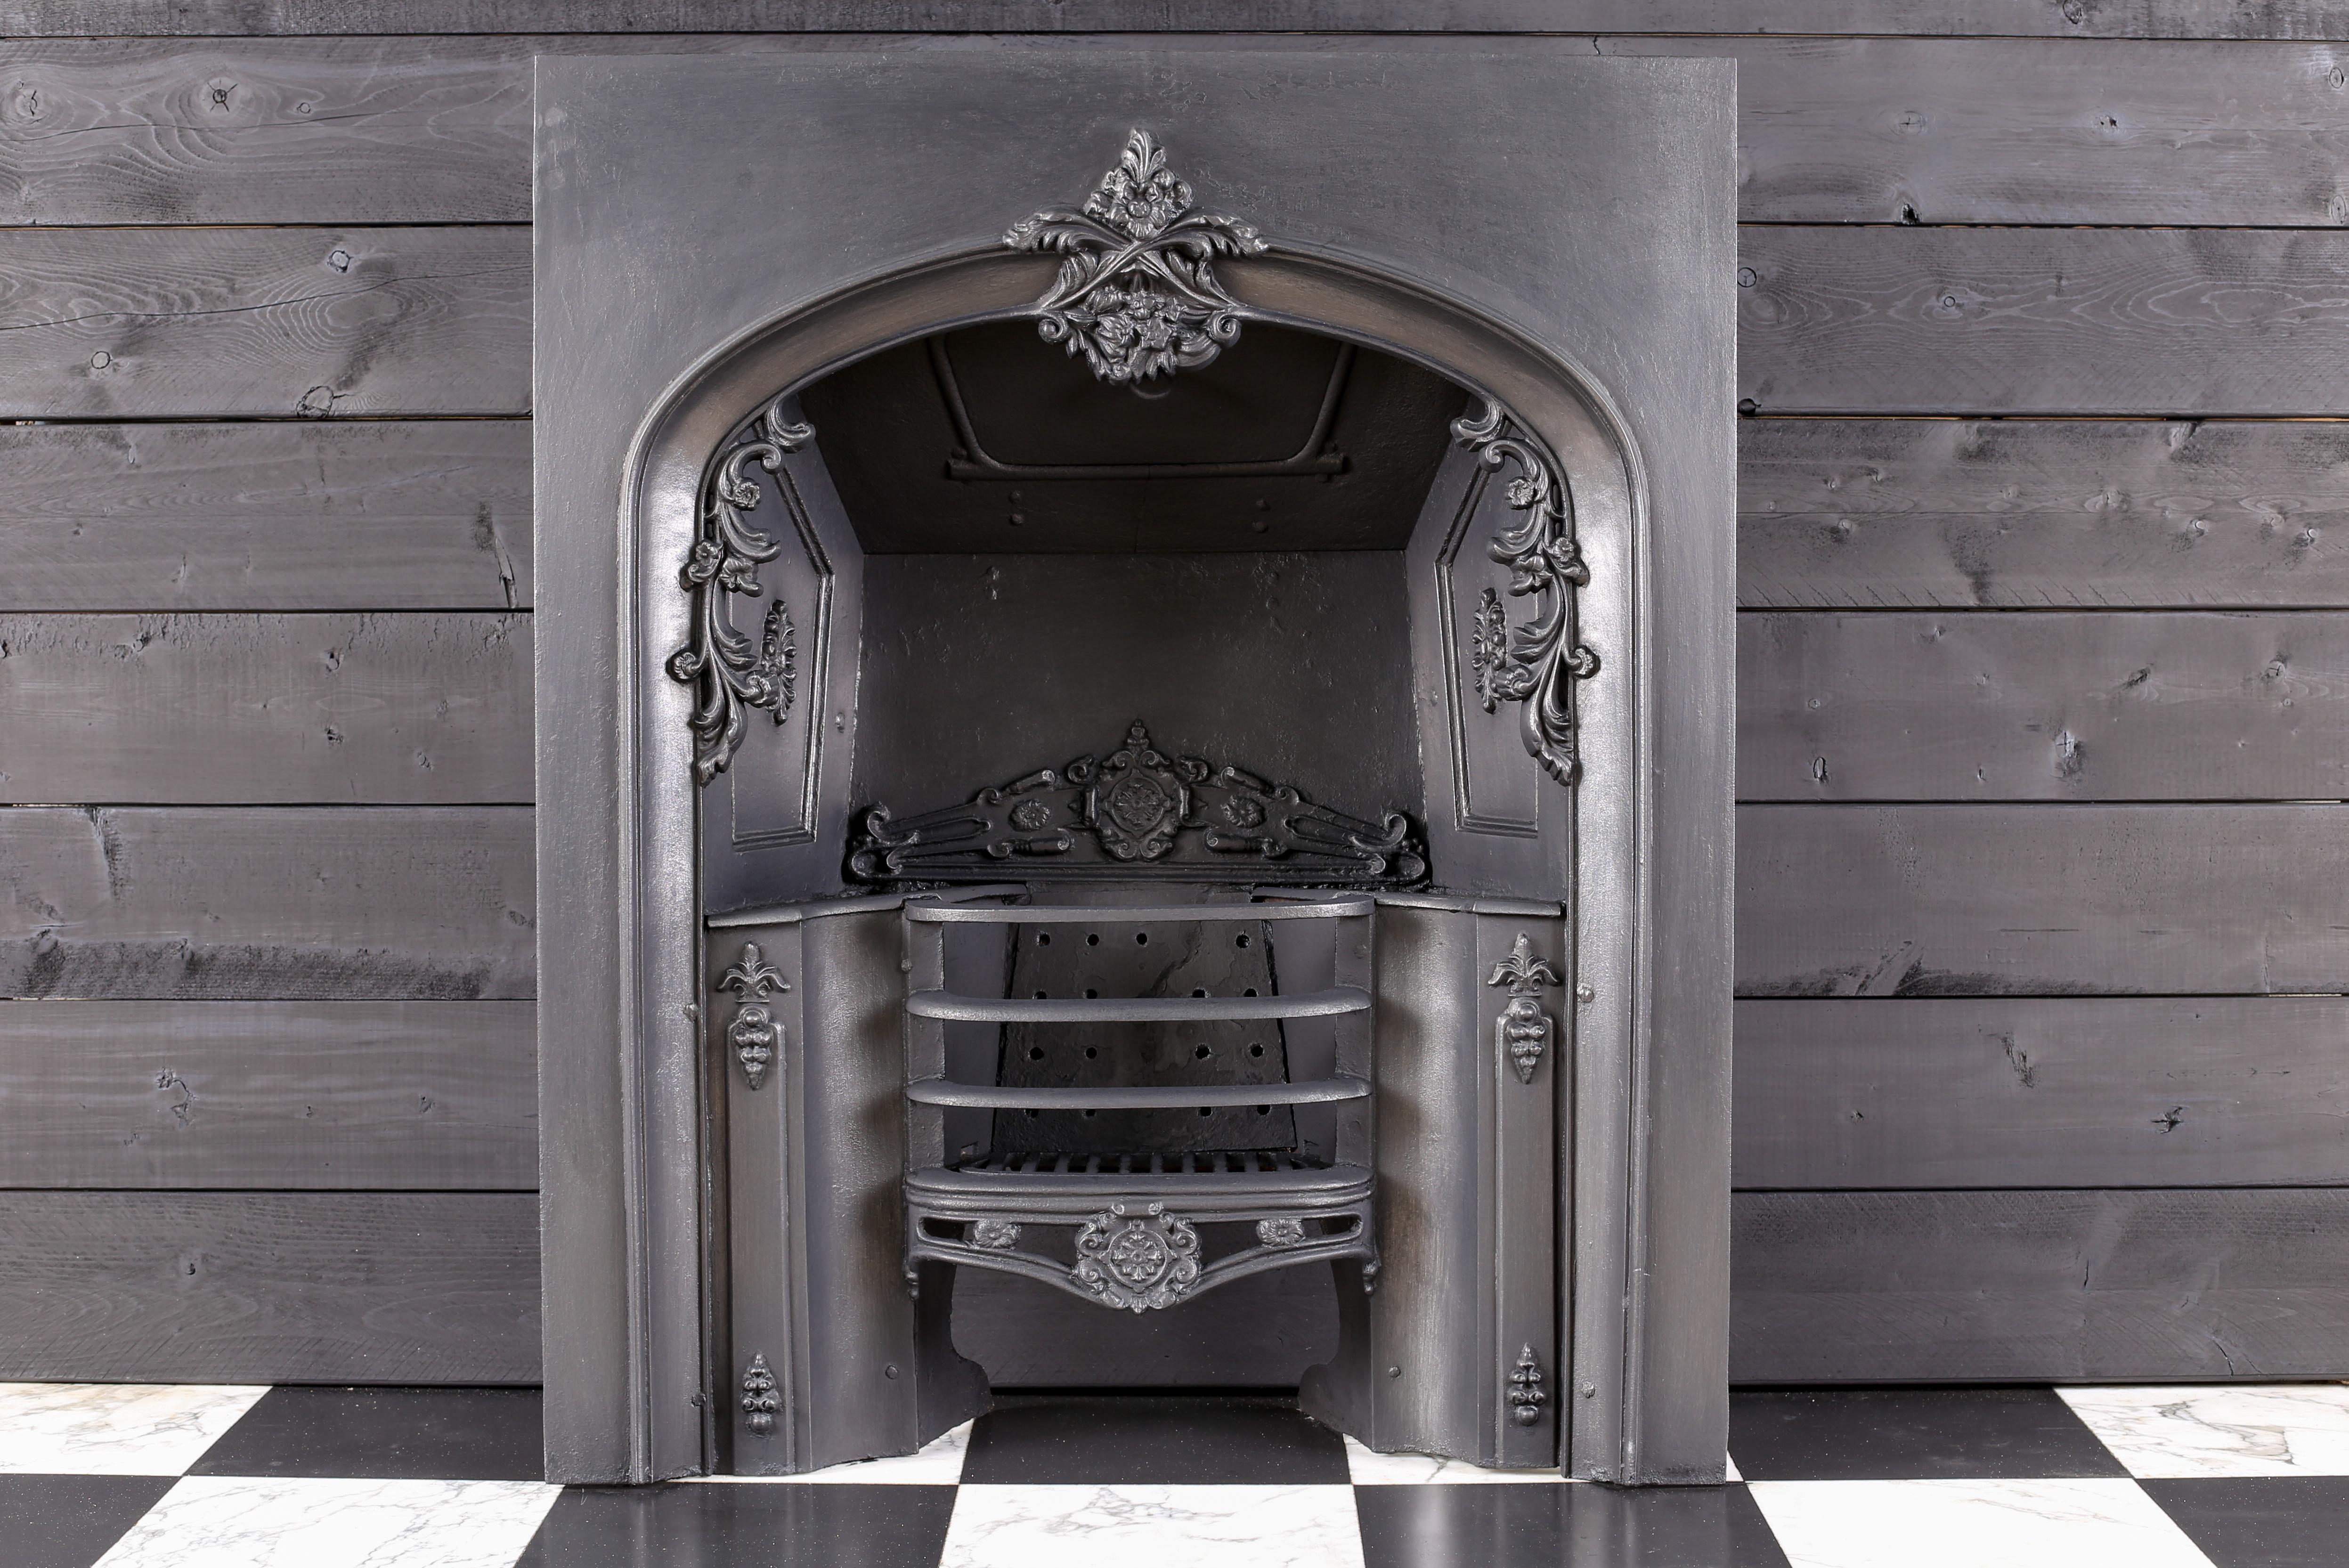 An attractive late Georgian early Victorian fire grate insert by Carron of Falkirk, Scotland, with very decorative detail around the opening and the integral hob grate, 19th century.

External Height: 36? – 92 cm
External Width: 30? – 76 cm.
 